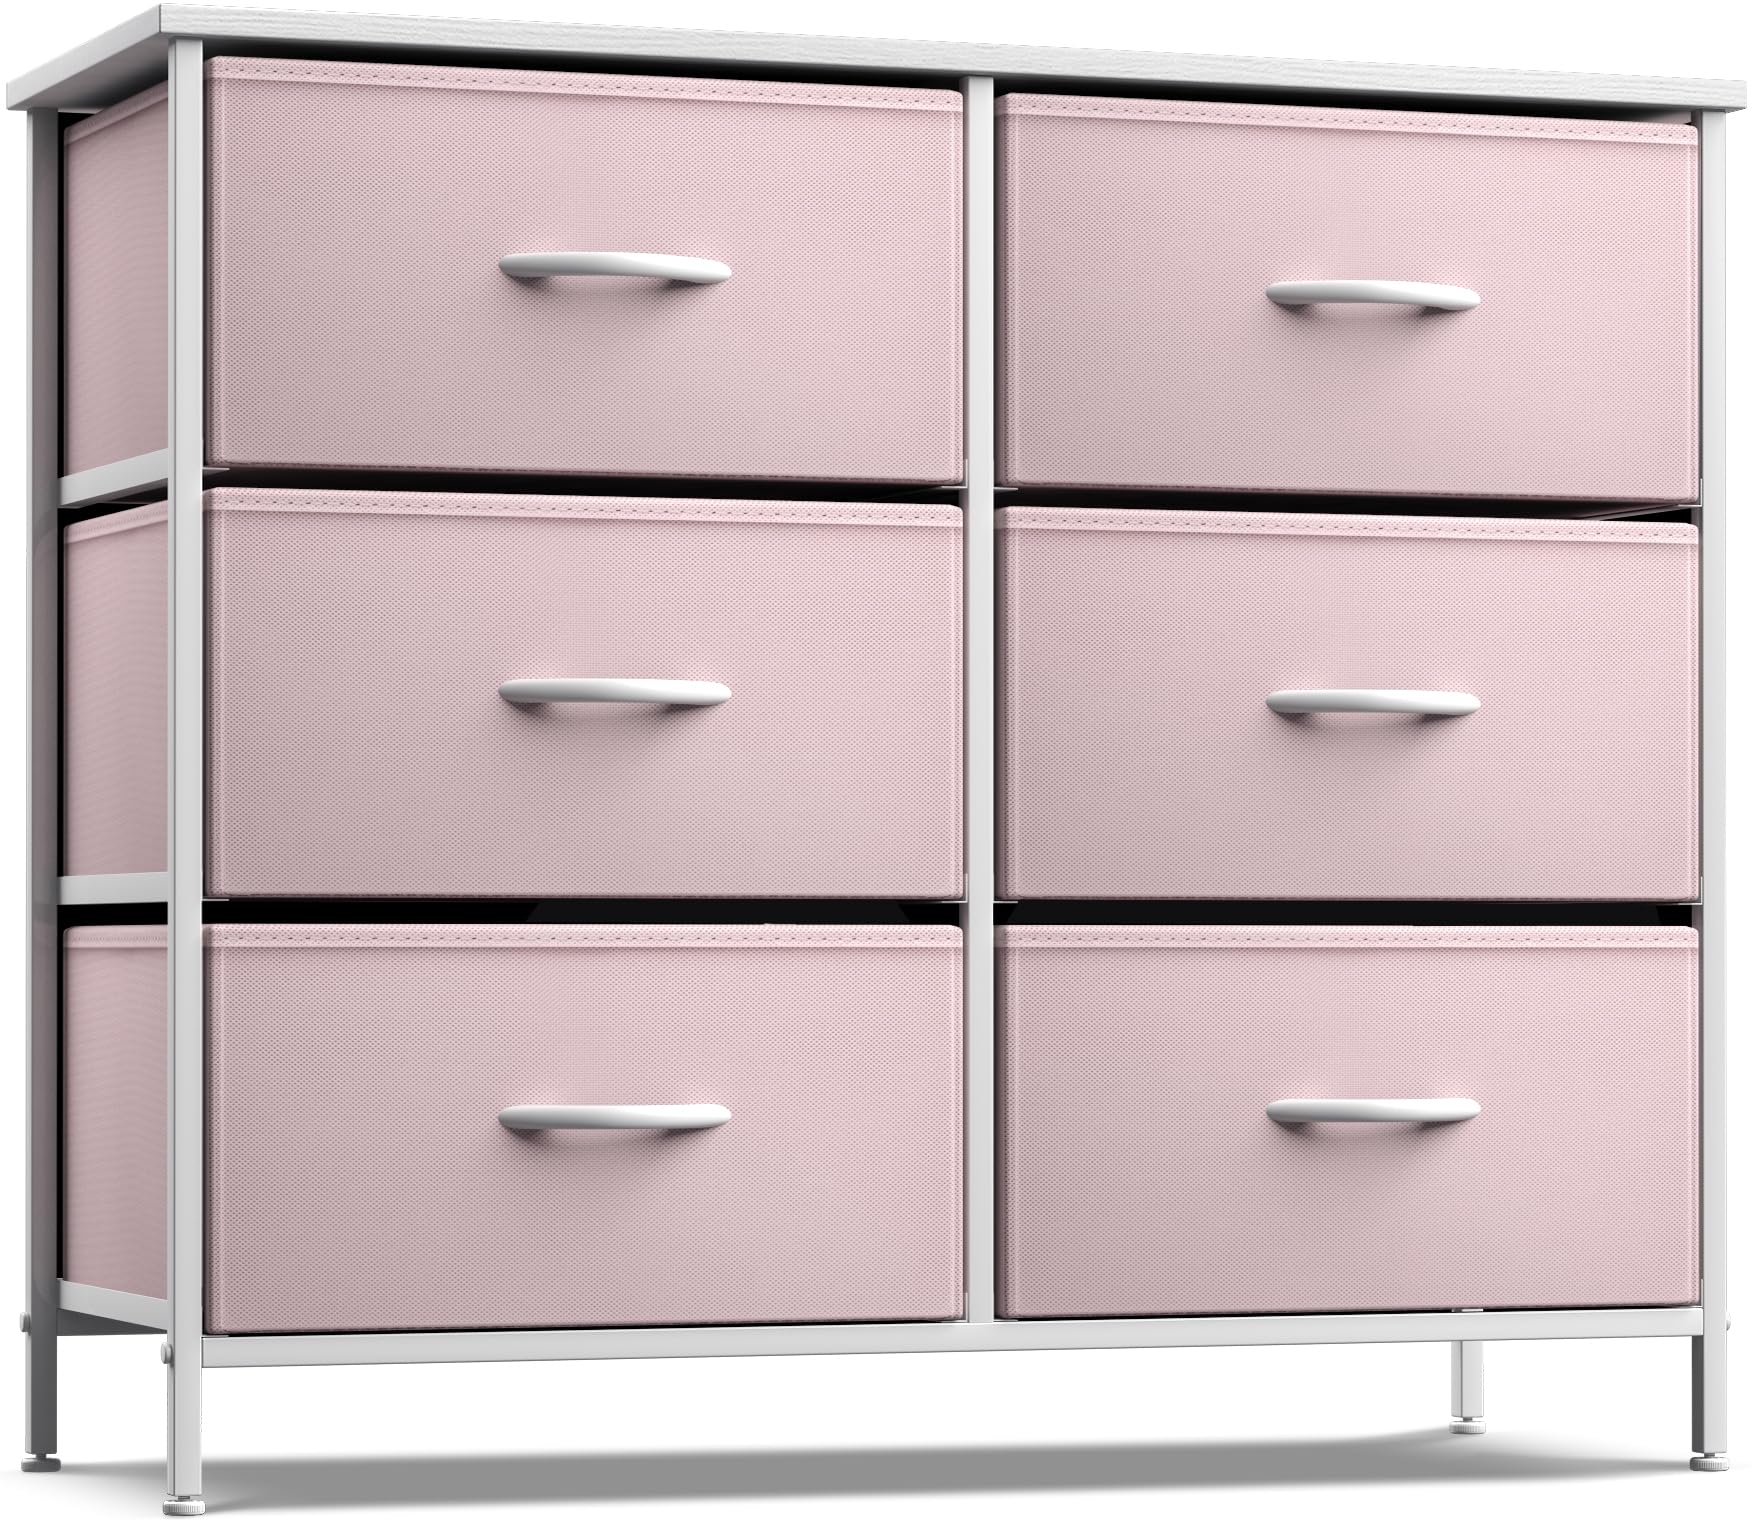 Sorbus Kids Dresser with 6 Drawers and 3 Drawer Nightstand Bundle - Matching Furniture Set - Storage Unit Organizer Chests for Clothing - Bedroom, Kids Rooms, Nursery, & Closet (Pink)